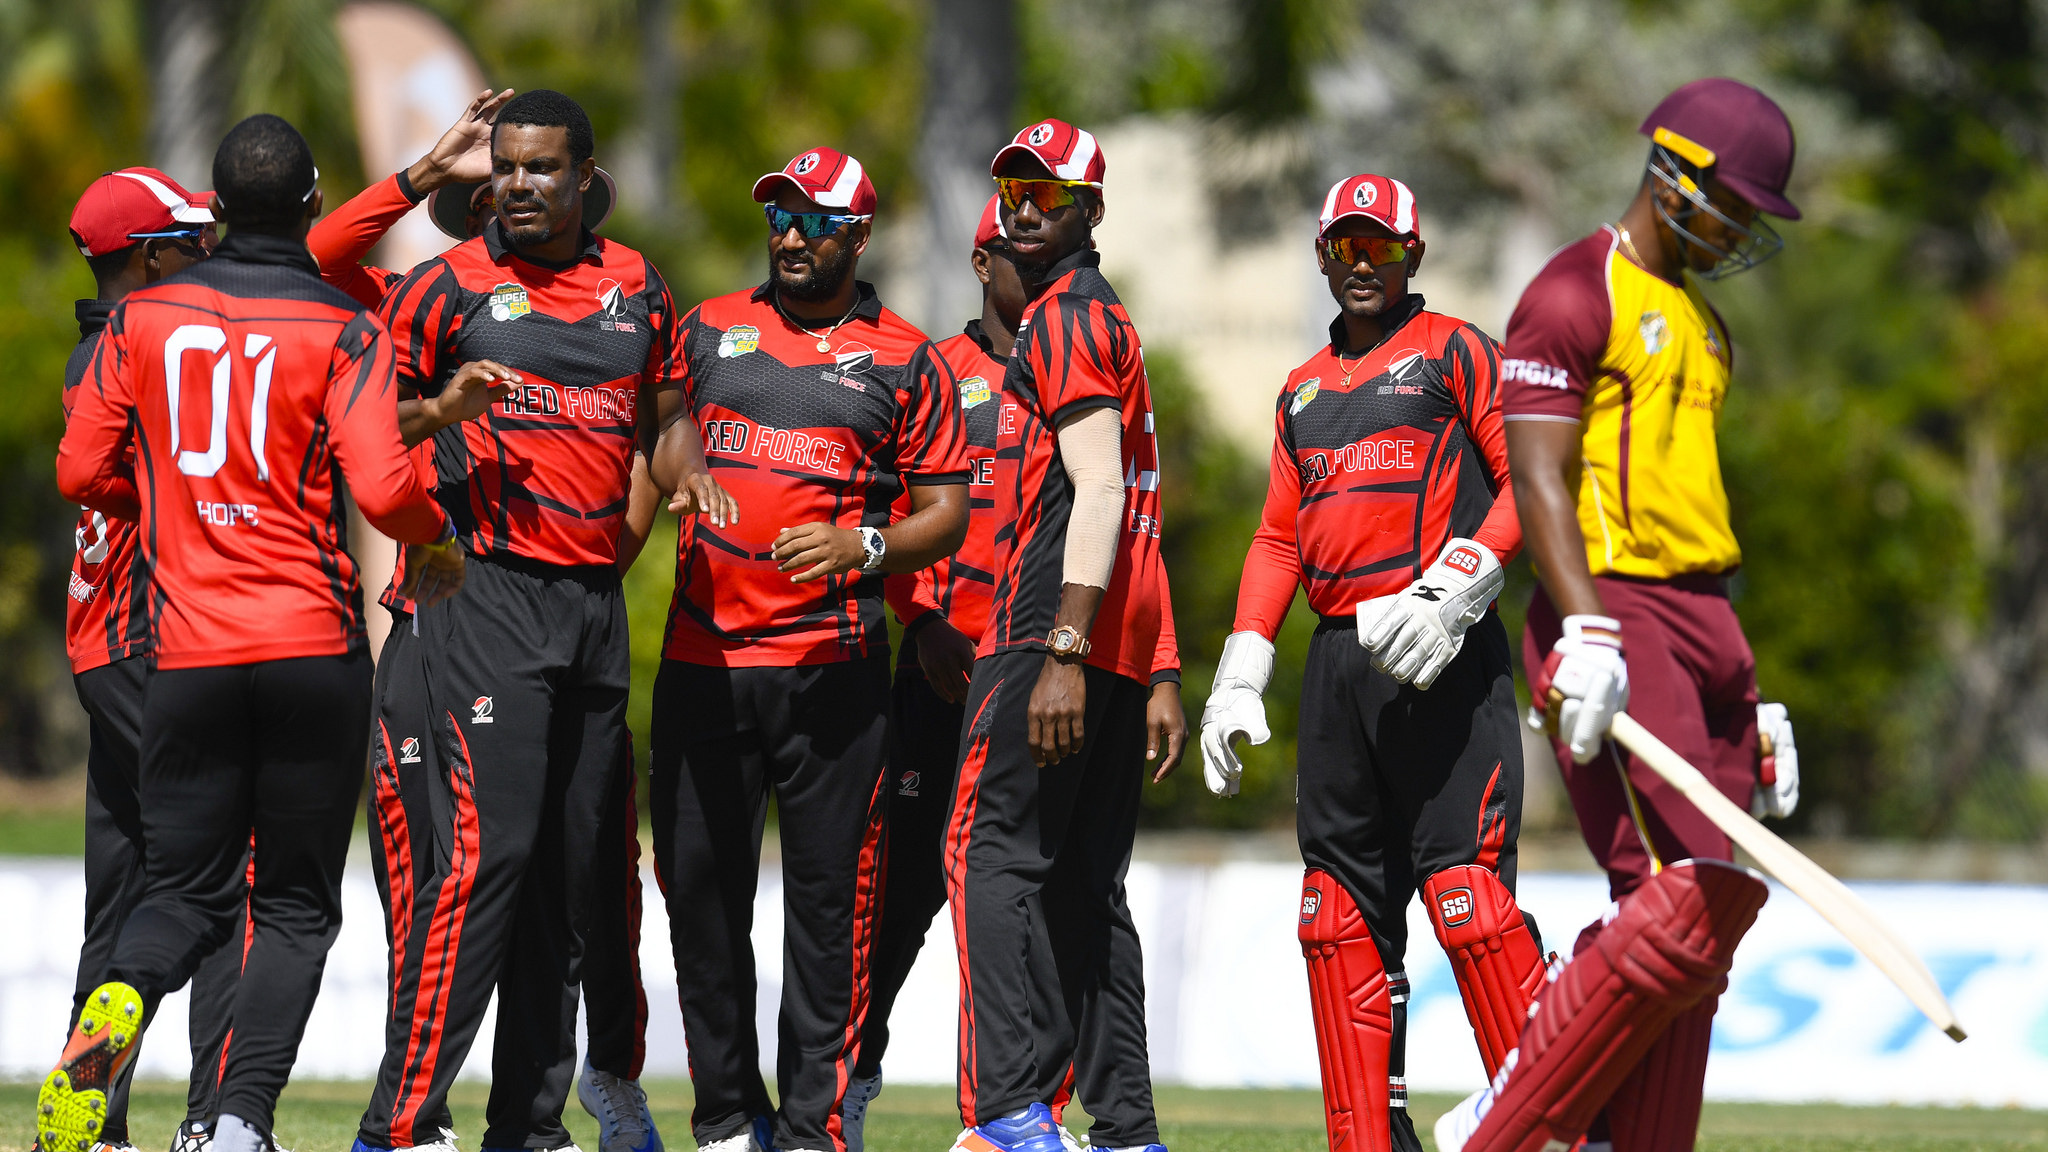 T&T Red Force wins Super 50 Cup 2019